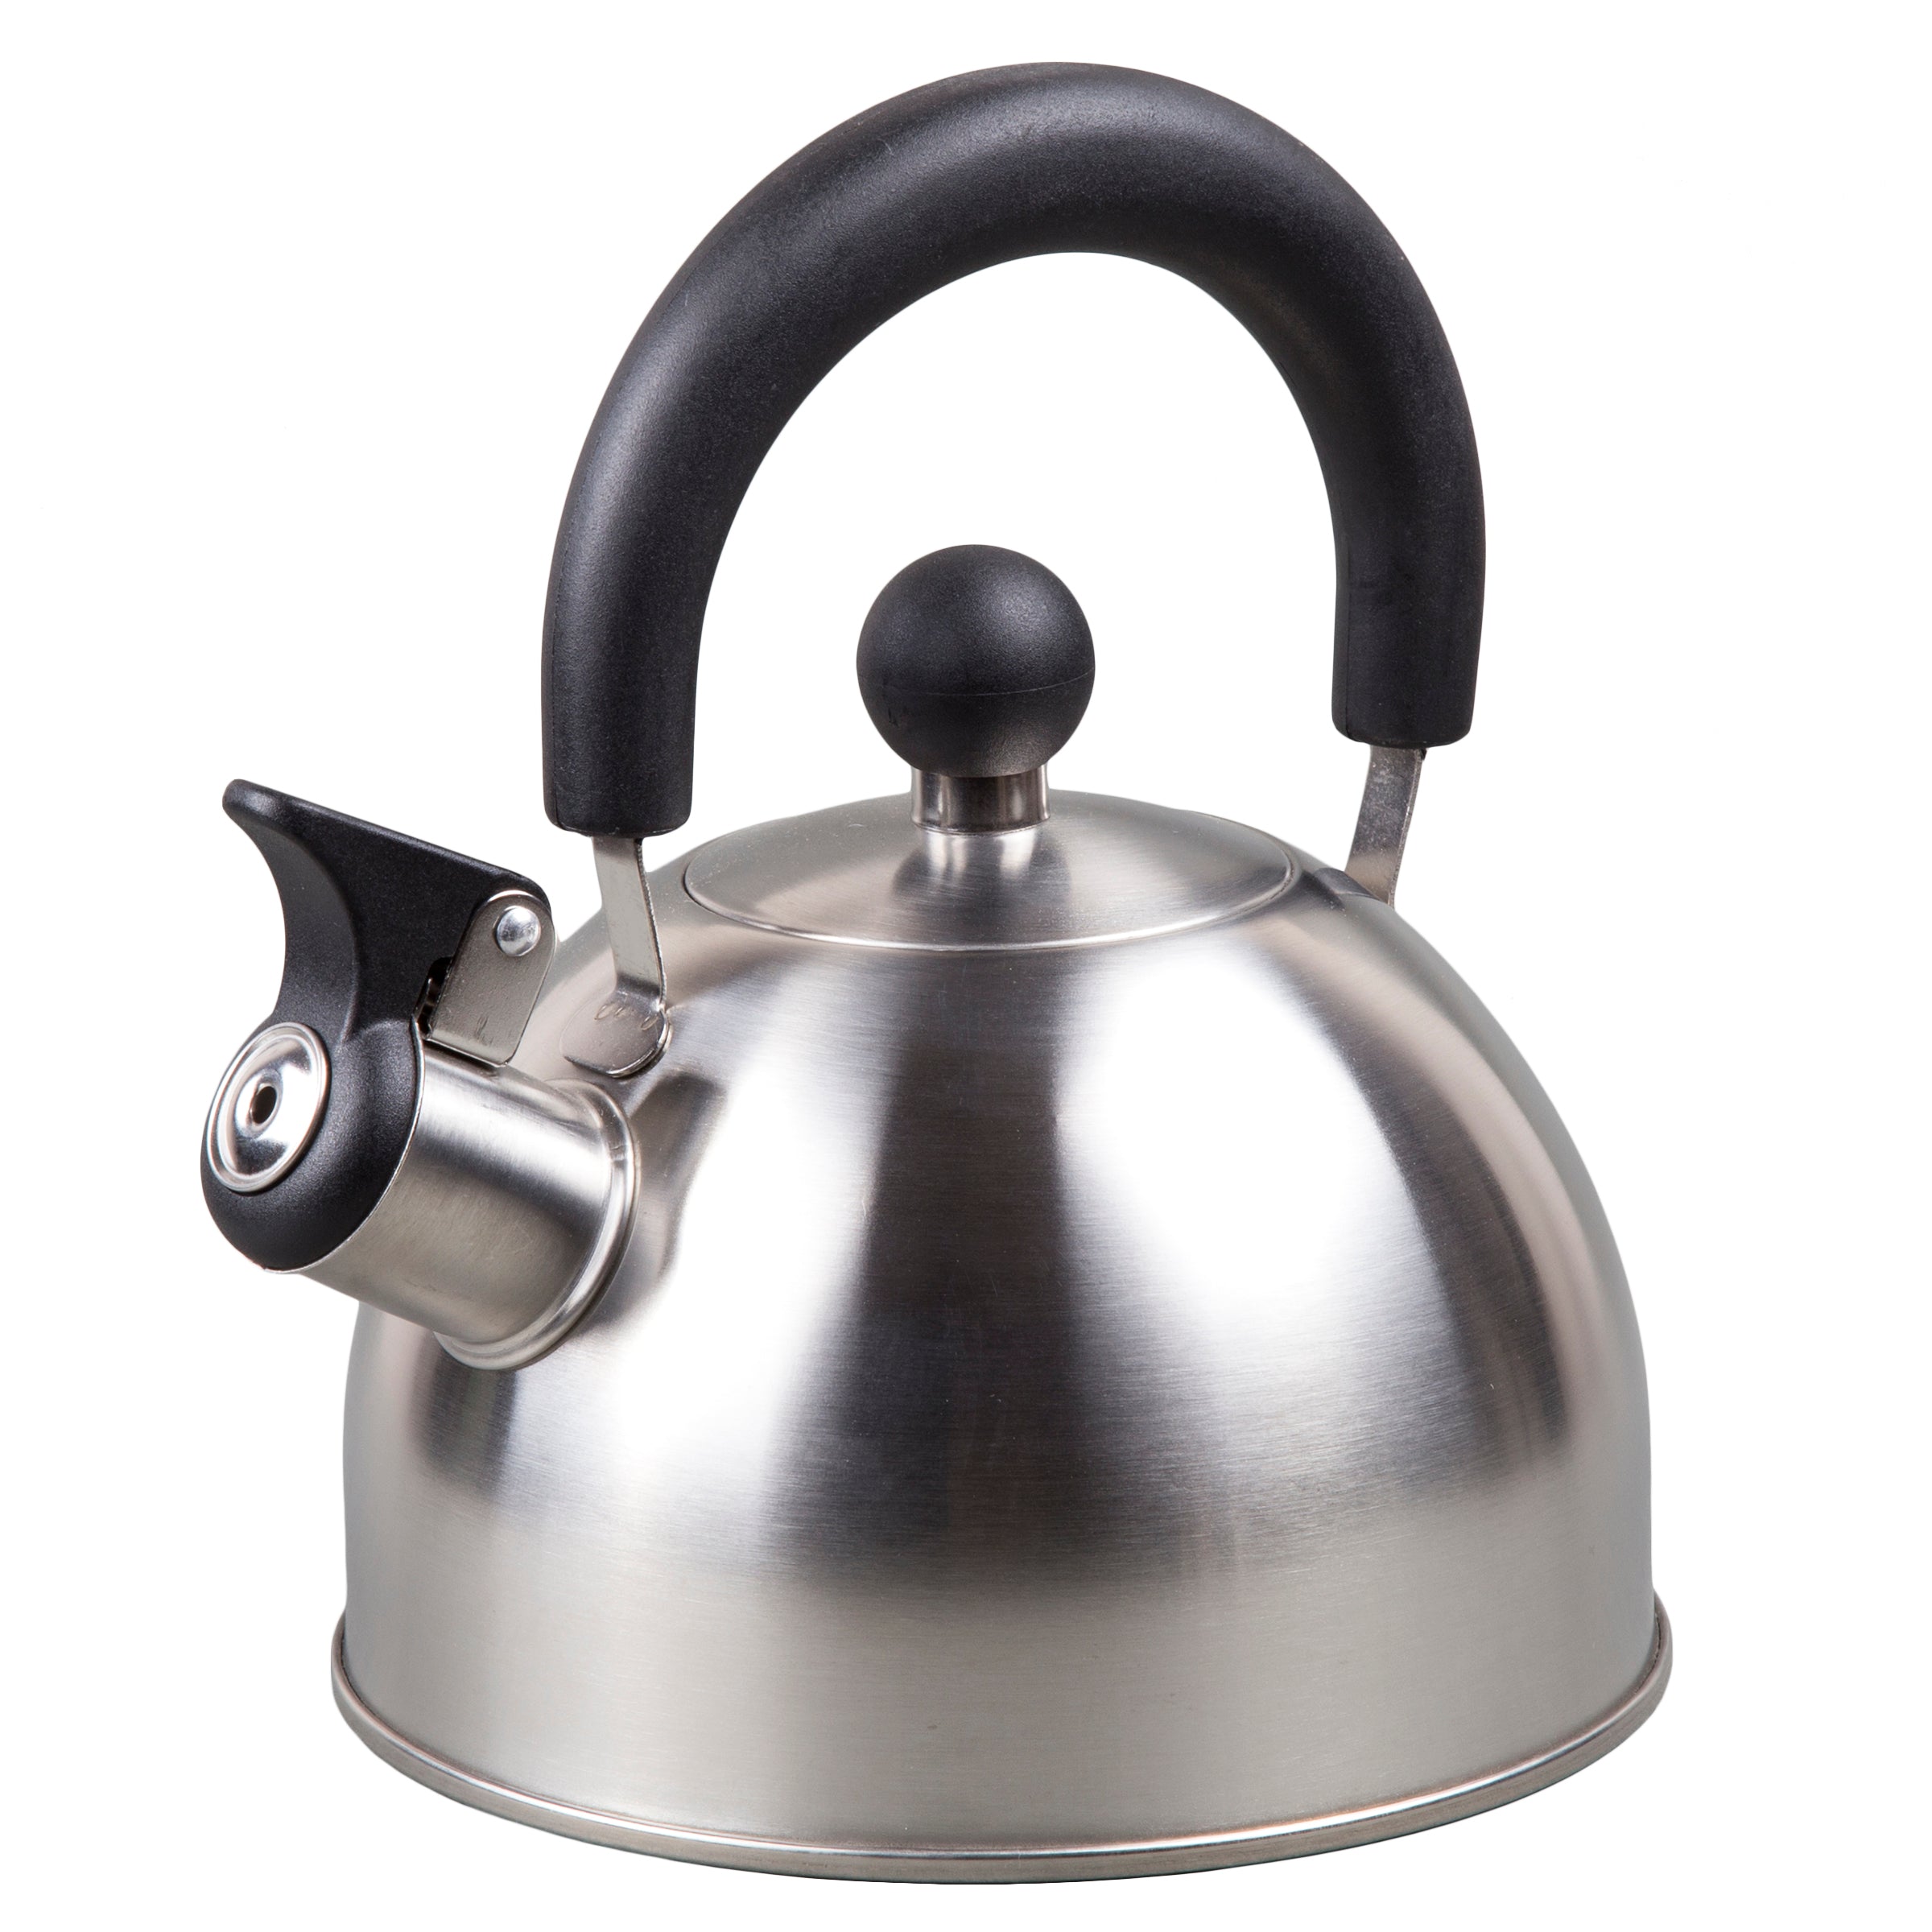 Creative Home 12 Cups Creamy White Stainless Steel Whistling Tea Kettle Teapot with Ergonomic Wood Rubber Touching Handle